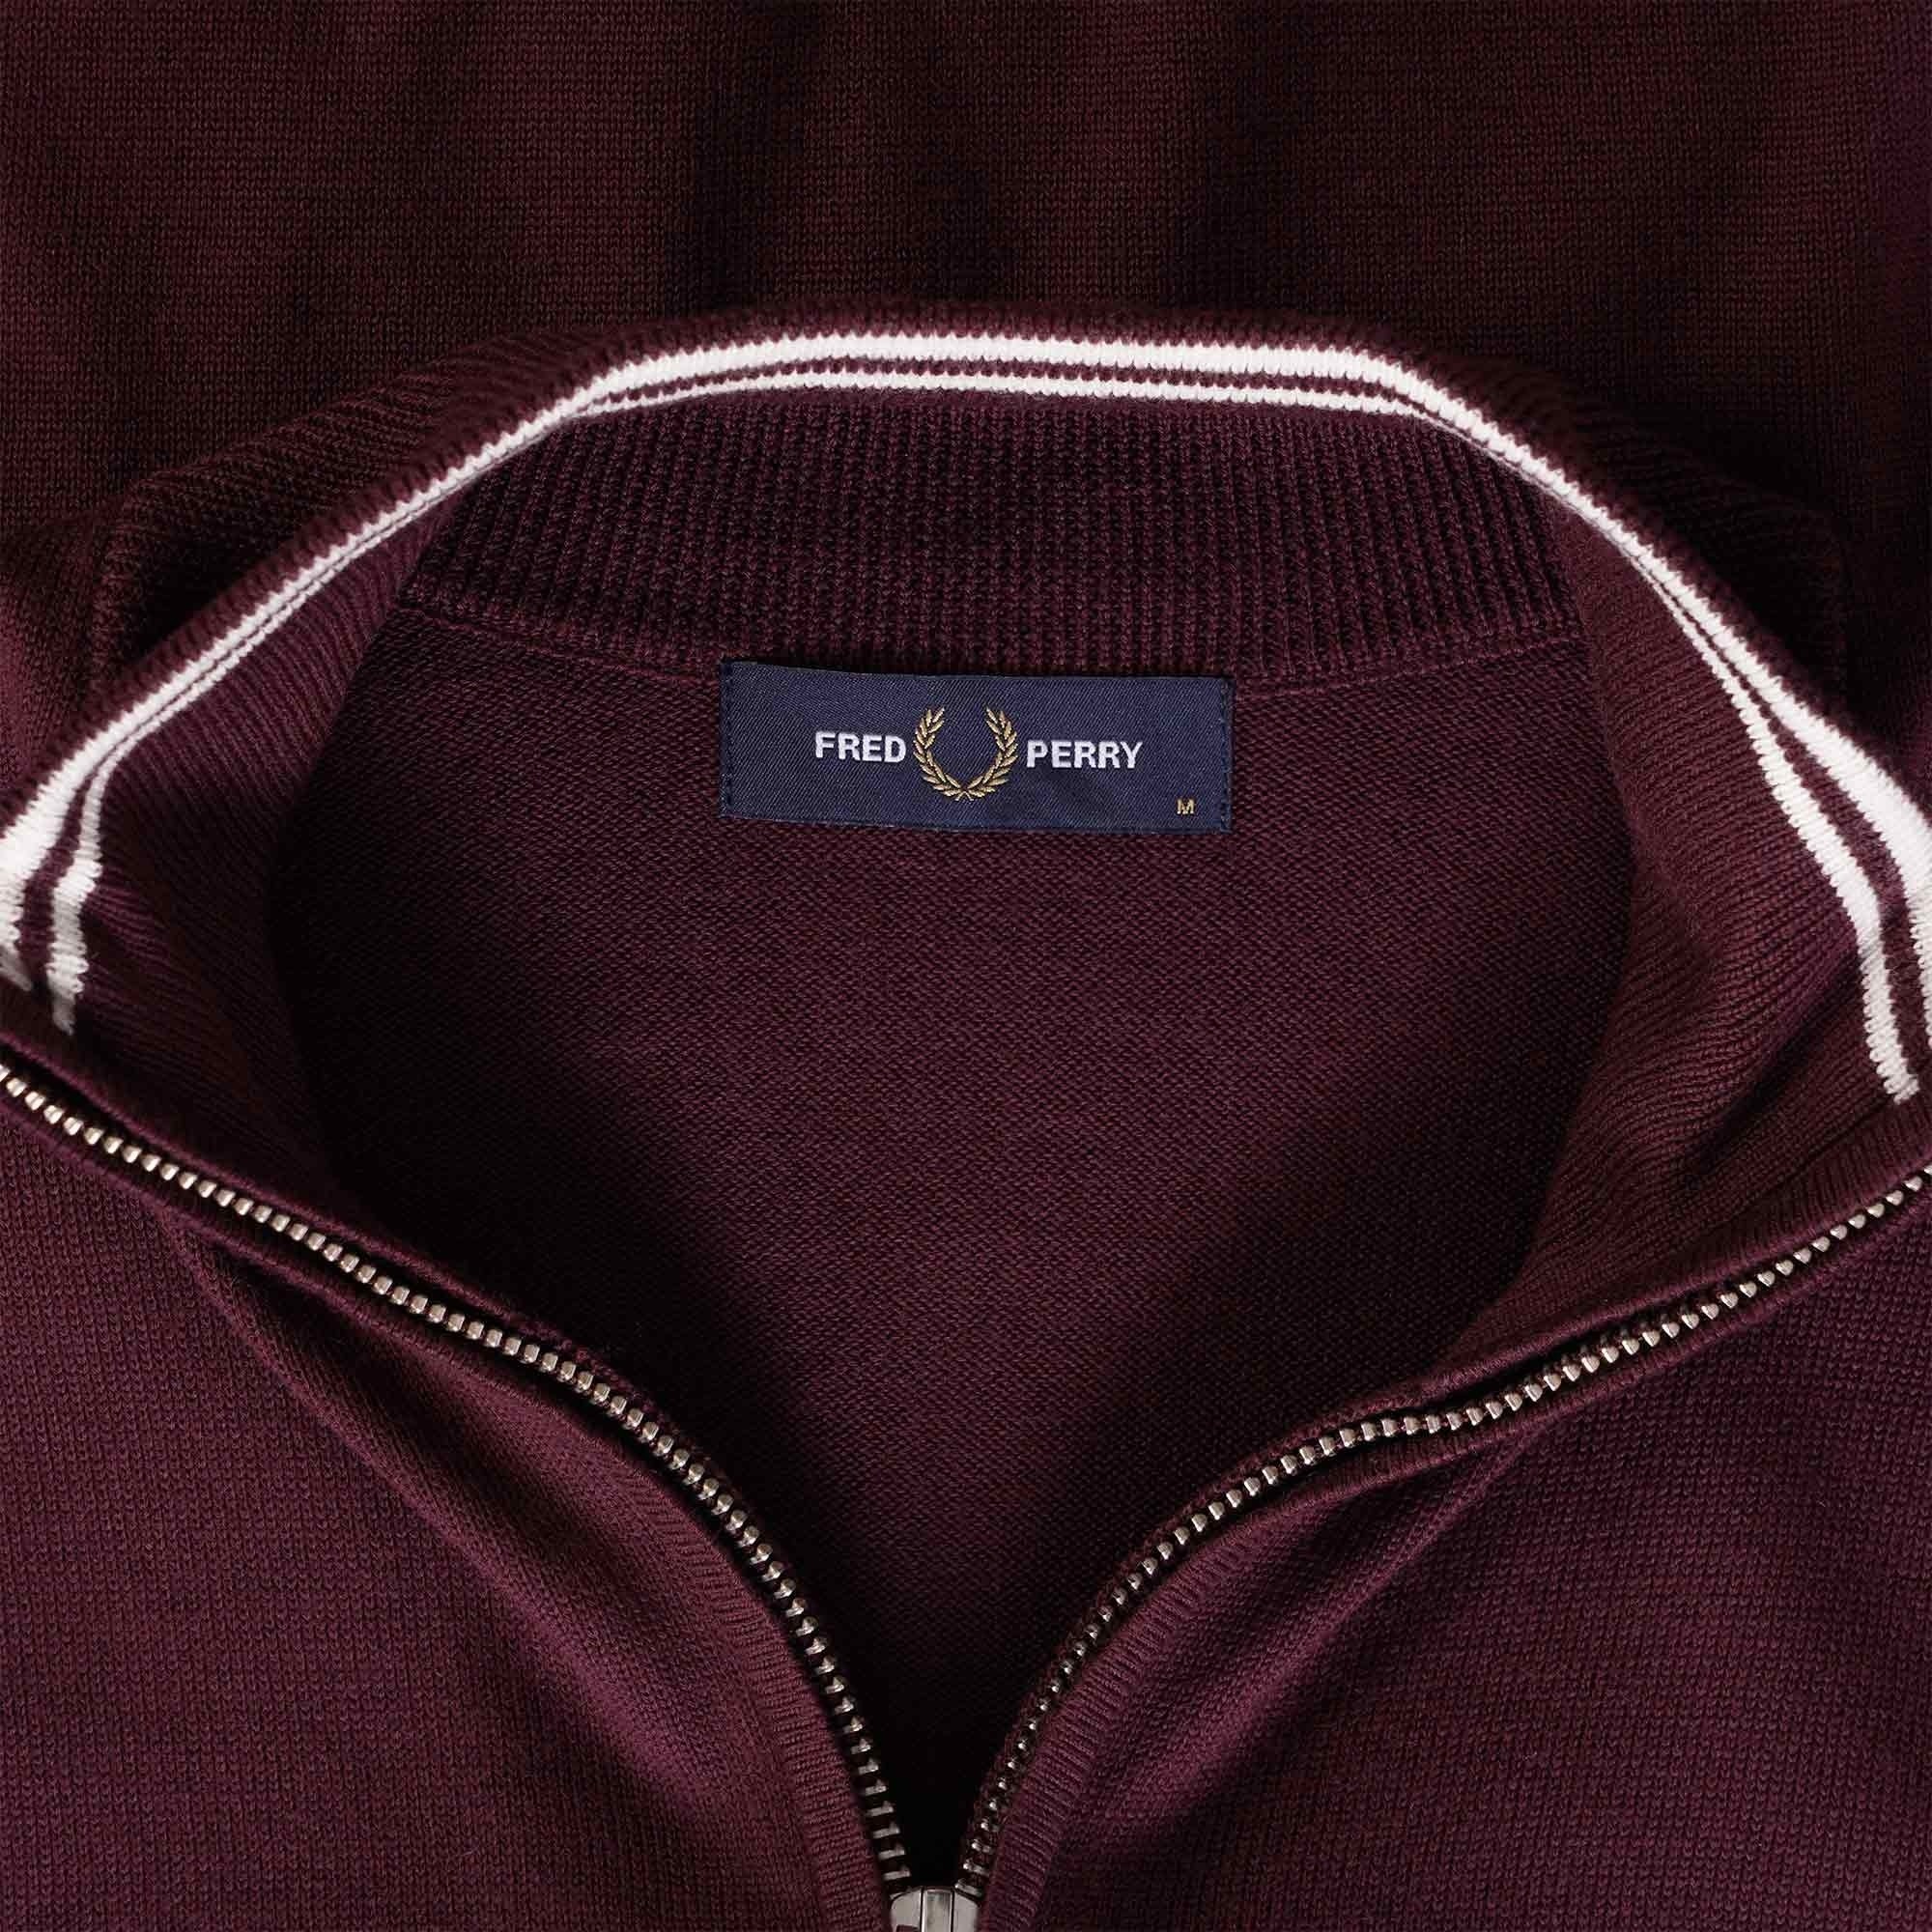 FRED PERRY AUTHENTIC CLASSIC ZIP THROUGH CARDIGAN BURGUNDY